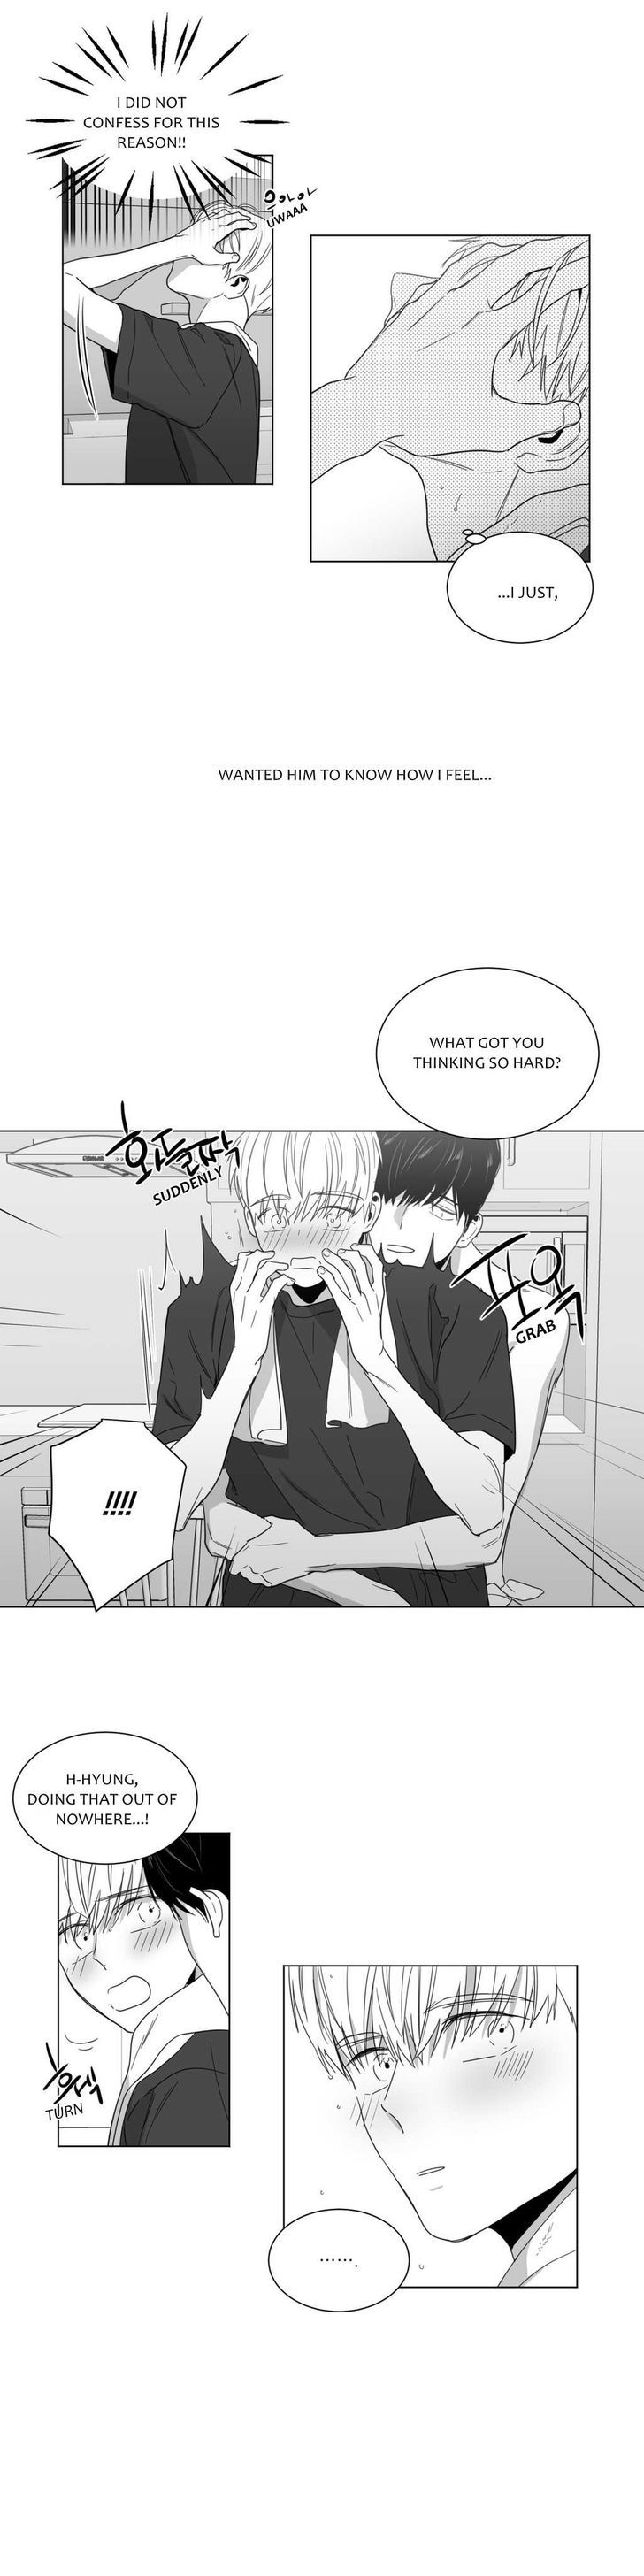 Lover Boy (Lezhin) Chapter 015 page 3